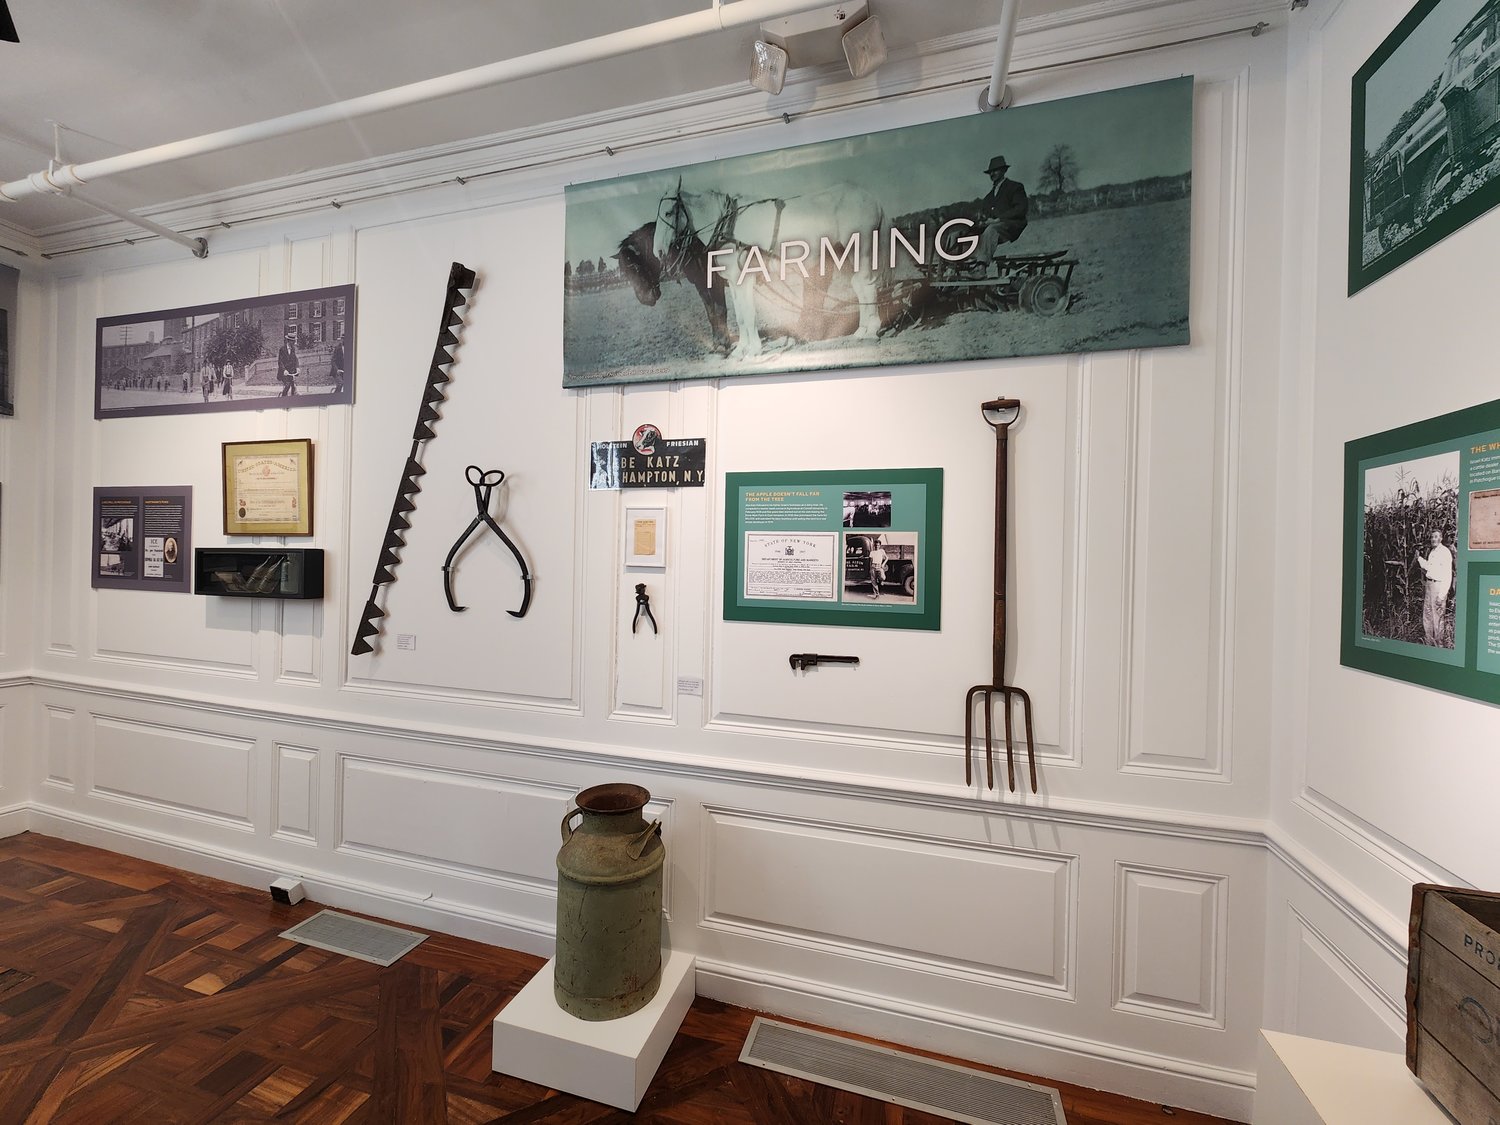 In the early 1900s, a number of Jewish farmers settled on Long Island’s East End, including cattle dealers, a duck farmer and dairy farmers. The exhibit features tools they used to maintain their farms.